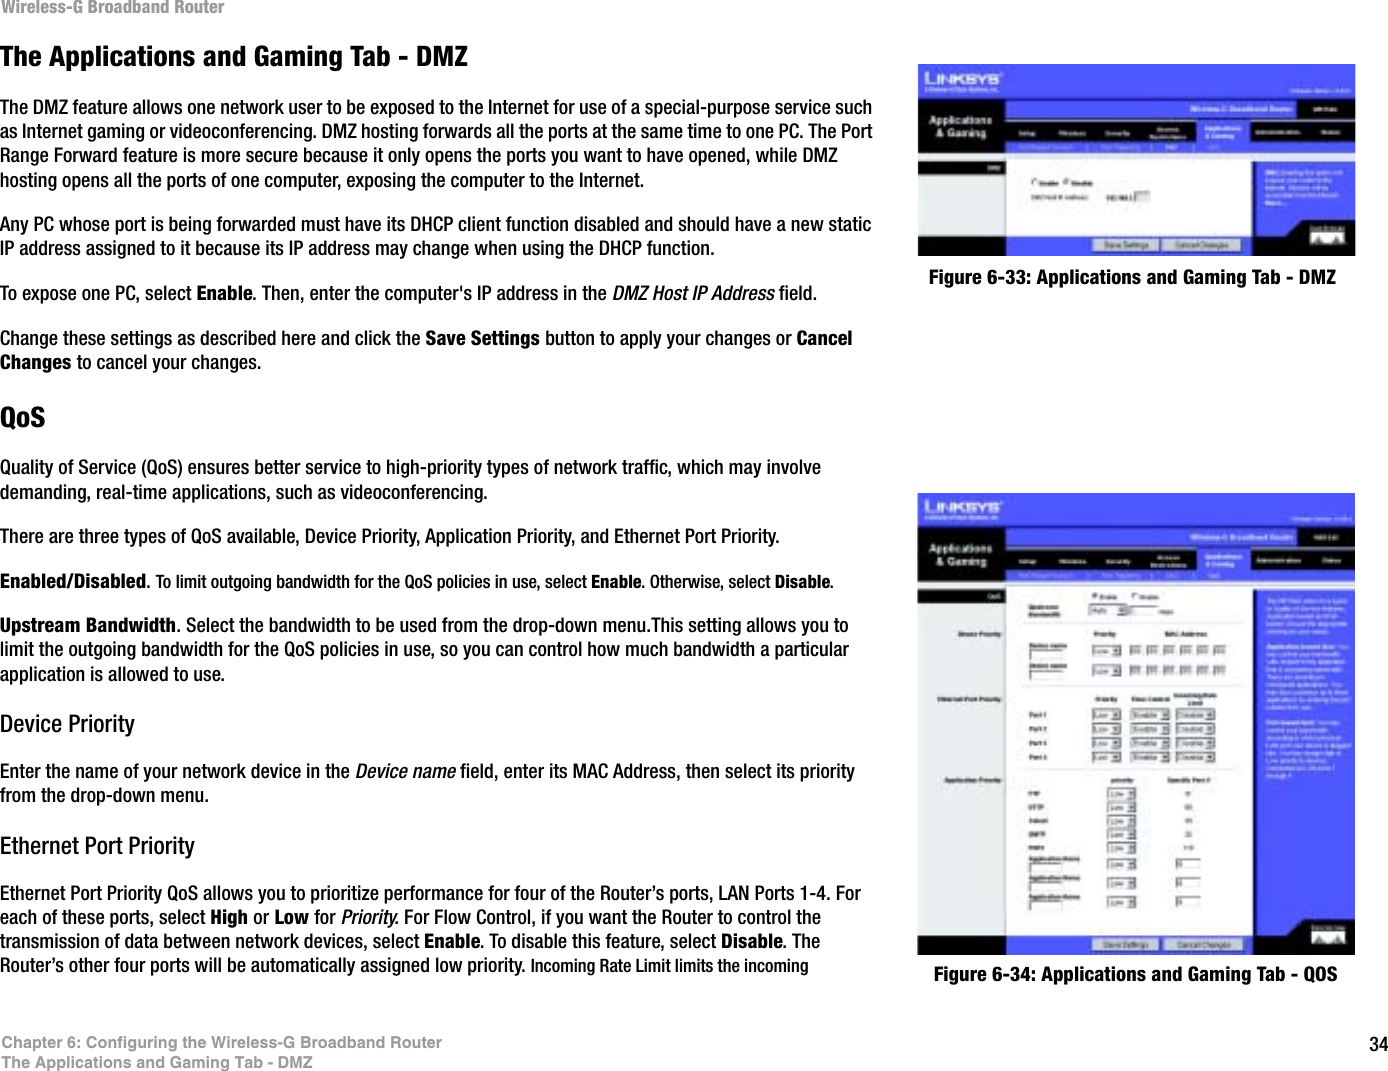 34Chapter 6: Configuring the Wireless-G Broadband RouterThe Applications and Gaming Tab - DMZWireless-G Broadband RouterFigure 6-33: Applications and Gaming Tab - DMZThe Applications and Gaming Tab - DMZThe DMZ feature allows one network user to be exposed to the Internet for use of a special-purpose service such as Internet gaming or videoconferencing. DMZ hosting forwards all the ports at the same time to one PC. The Port Range Forward feature is more secure because it only opens the ports you want to have opened, while DMZ hosting opens all the ports of one computer, exposing the computer to the Internet. Any PC whose port is being forwarded must have its DHCP client function disabled and should have a new static IP address assigned to it because its IP address may change when using the DHCP function.To expose one PC, select Enable. Then, enter the computer&apos;s IP address in the DMZ Host IP Address field.Change these settings as described here and click the Save Settings button to apply your changes or Cancel Changes to cancel your changes. QoSQuality of Service (QoS) ensures better service to high-priority types of network traffic, which may involve demanding, real-time applications, such as videoconferencing. There are three types of QoS available, Device Priority, Application Priority, and Ethernet Port Priority.Enabled/Disabled.To limit outgoing bandwidth for the QoS policies in use, select Enable. Otherwise, select Disable.Upstream Bandwidth. Select the bandwidth to be used from the drop-down menu.This setting allows you to limit the outgoing bandwidth for the QoS policies in use, so you can control how much bandwidth a particular application is allowed to use.Device PriorityEnter the name of your network device in the Device name field, enter its MAC Address, then select its priority from the drop-down menu.Ethernet Port PriorityEthernet Port Priority QoS allows you to prioritize performance for four of the Router’s ports, LAN Ports 1-4. For each of these ports, select High or Low for Priority. For Flow Control, if you want the Router to control the transmission of data between network devices, select Enable. To disable this feature, select Disable. The Router’s other four ports will be automatically assigned low priority. Incoming Rate Limit limits the incoming  Figure 6-34: Applications and Gaming Tab - QOS